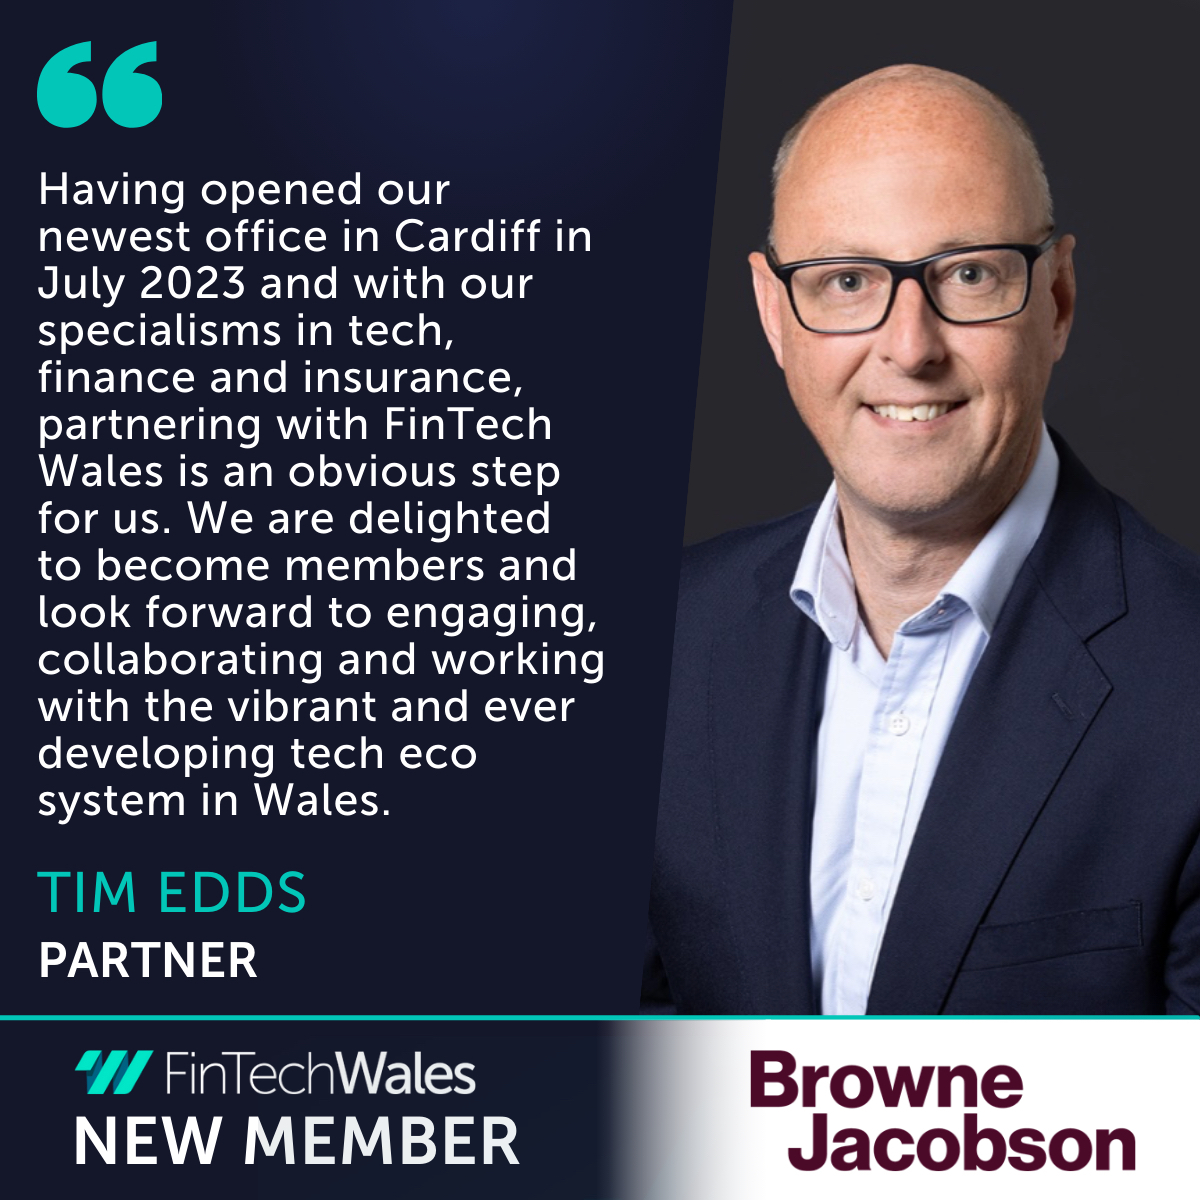 🔥 Exciting news for the FinTech Wales community! We'd like to extend a big welcome to the latest FinTech Wales member - @brownejacobson . Browne Jacobson is the law firm working to make a difference across business and society. Find out more: fintechwales.org/members/browne…